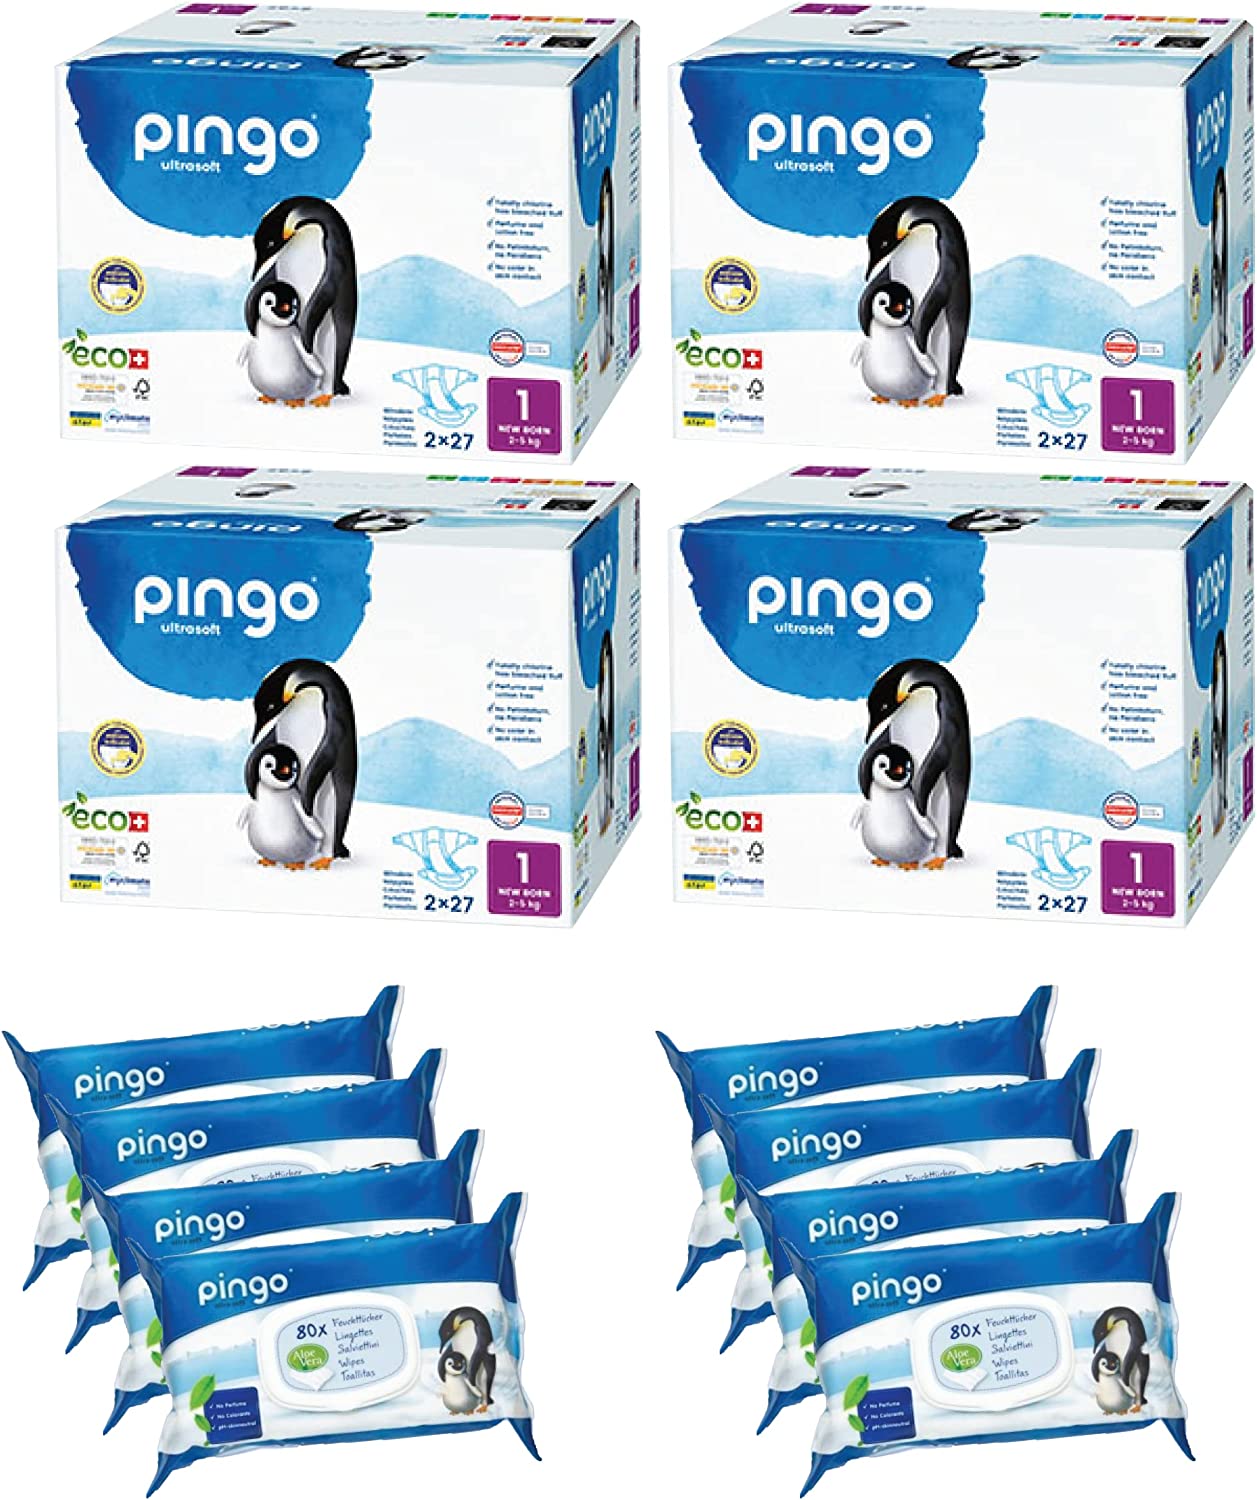 Pingo Organic Planet-Friendly Disposable Swiss Premium Diapers Newborn Size 1, 4 Pack Jumbo Bulk Box, 4.4 to 11 Pounds, 216 Diapers and 8 Packs of 80ct Wipes (640ct Total Wipes), 2 Month Supply